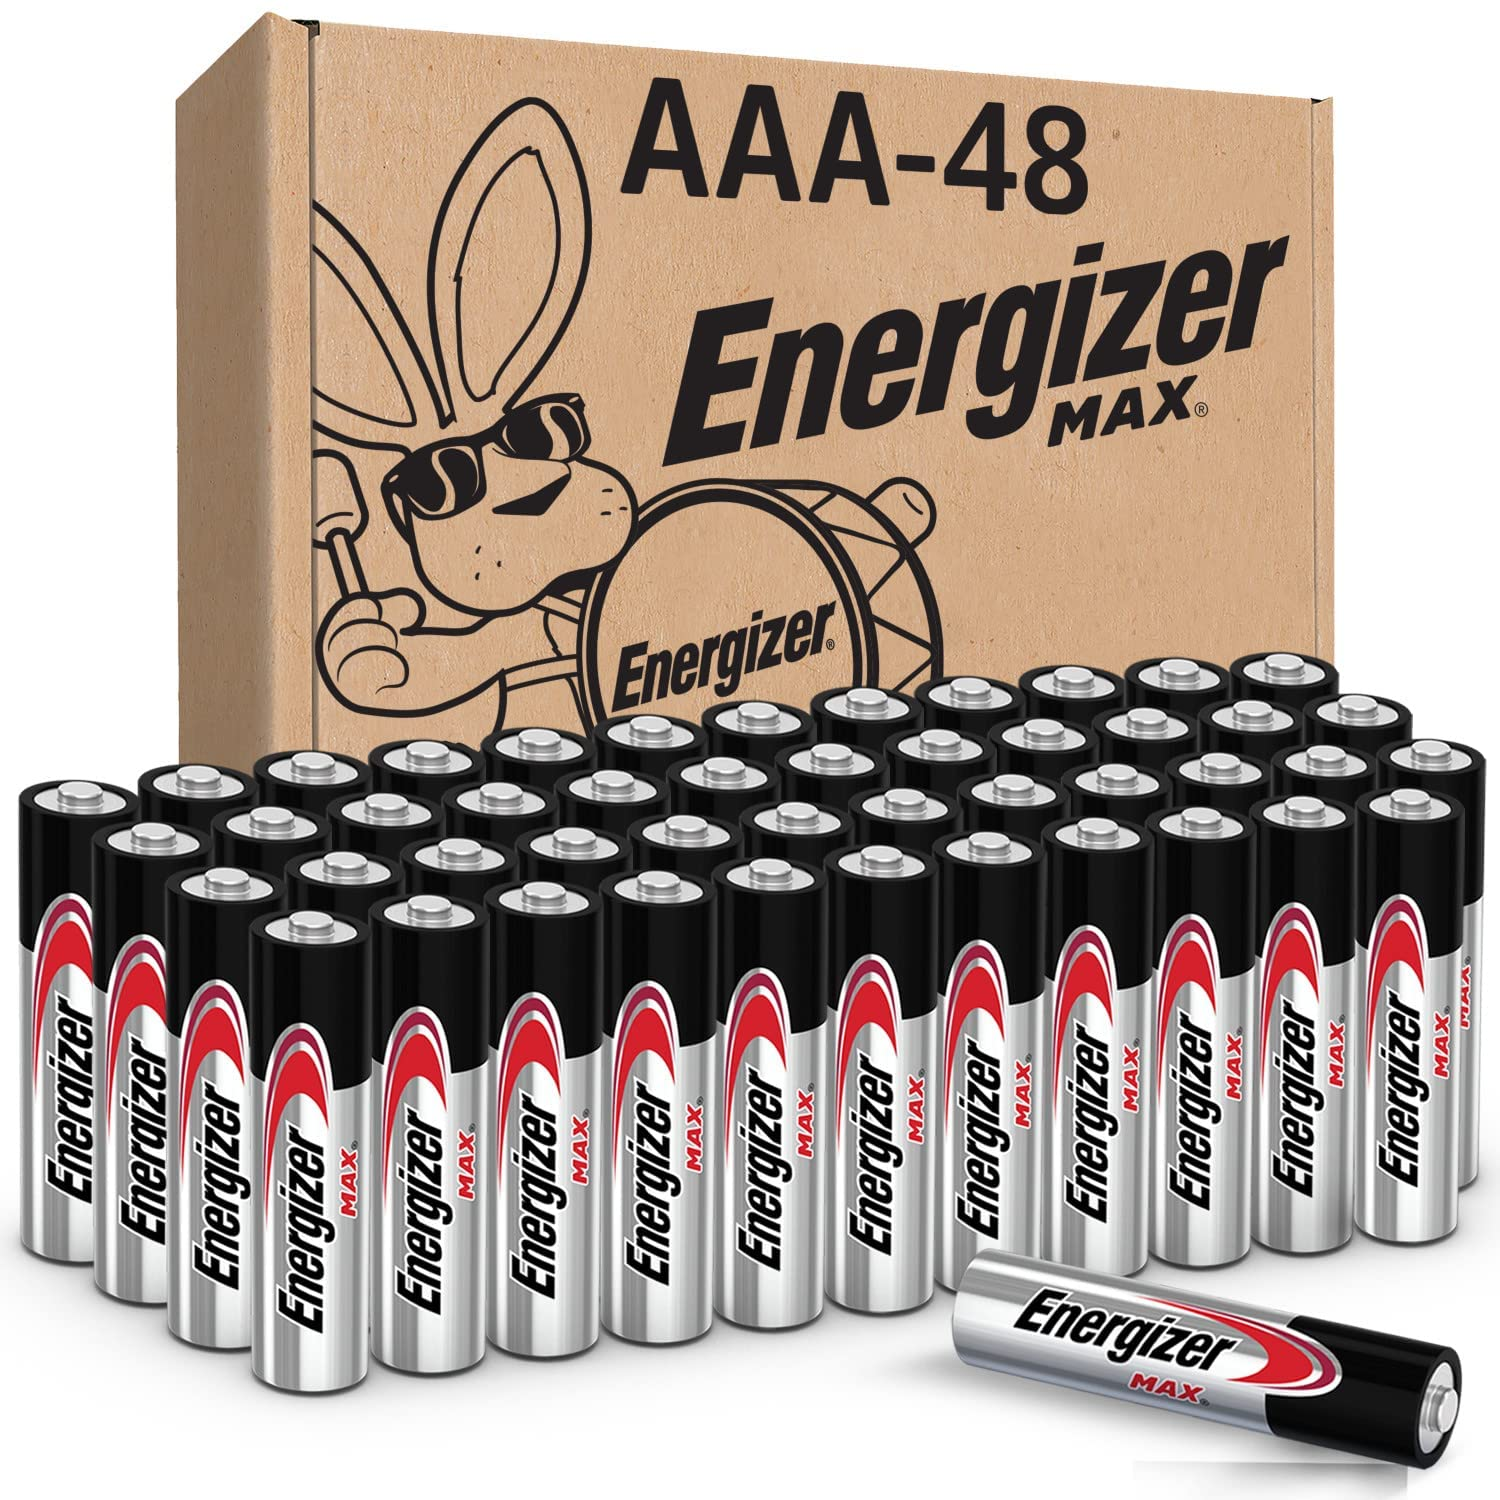 Energizer AAA Batteries, Max Triple A Battery Alkaline, 48 Count : Electronics $11.22